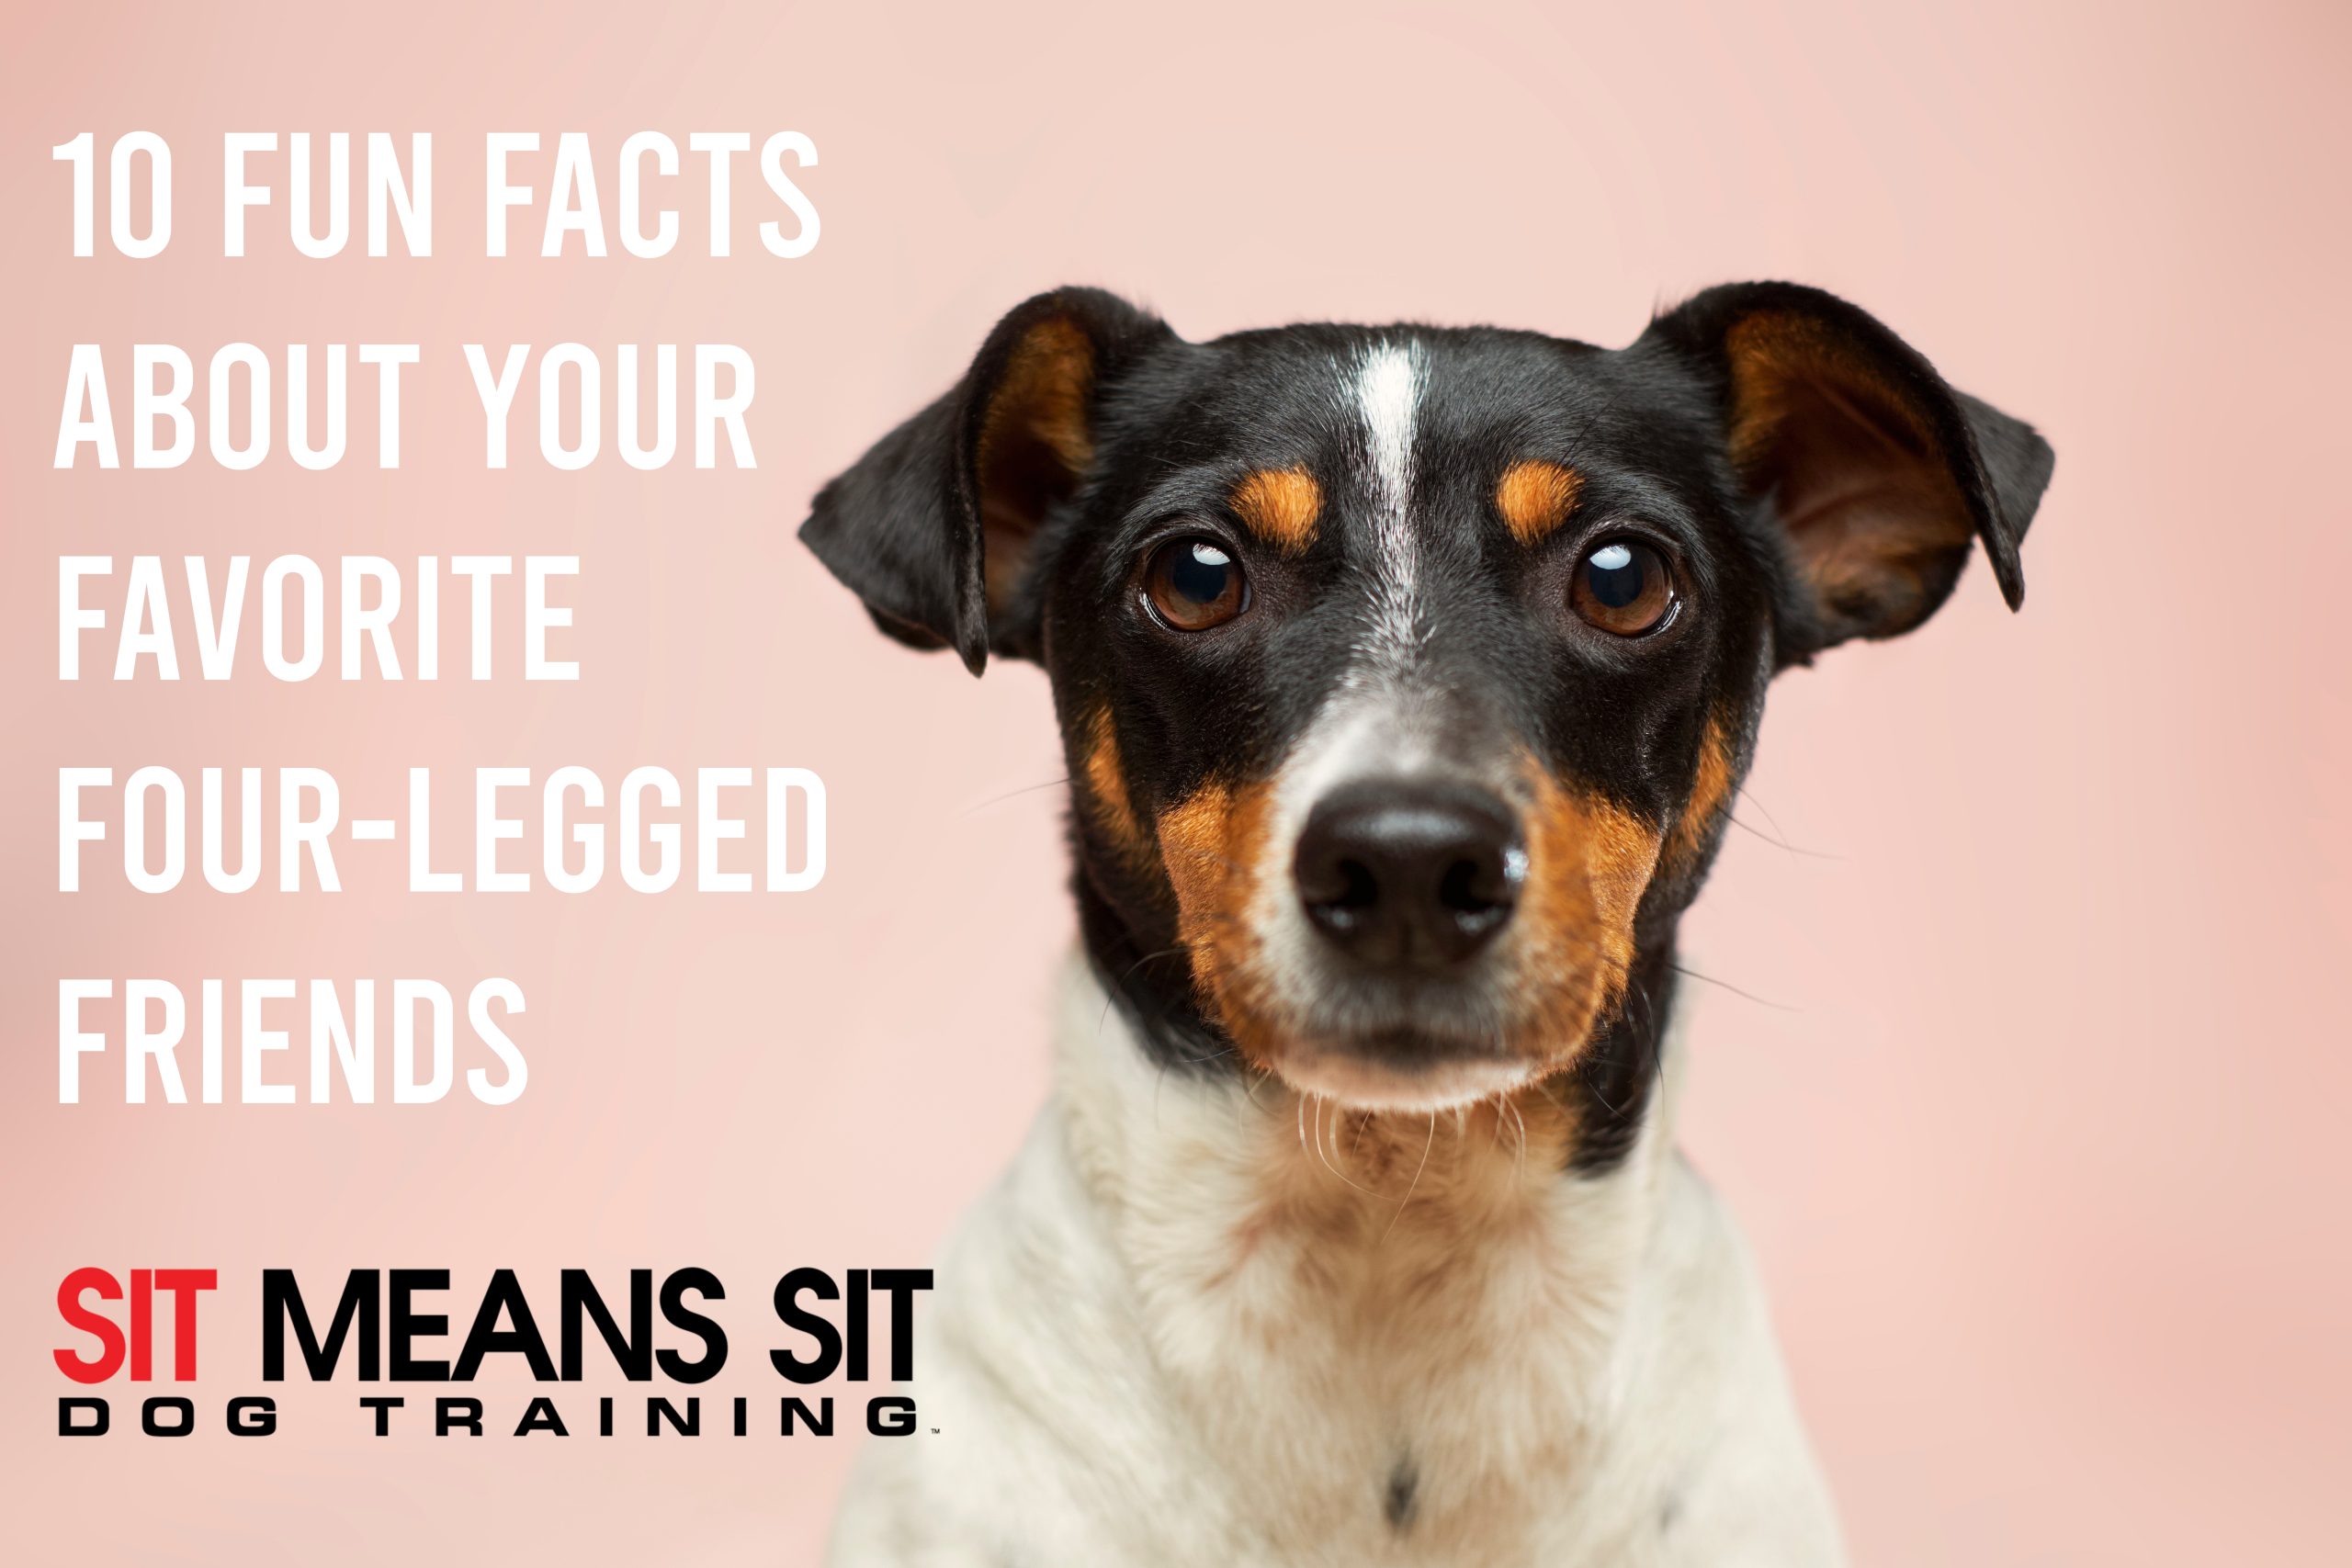 10 Fun Facts About Your Favorite Four-Legged Friends